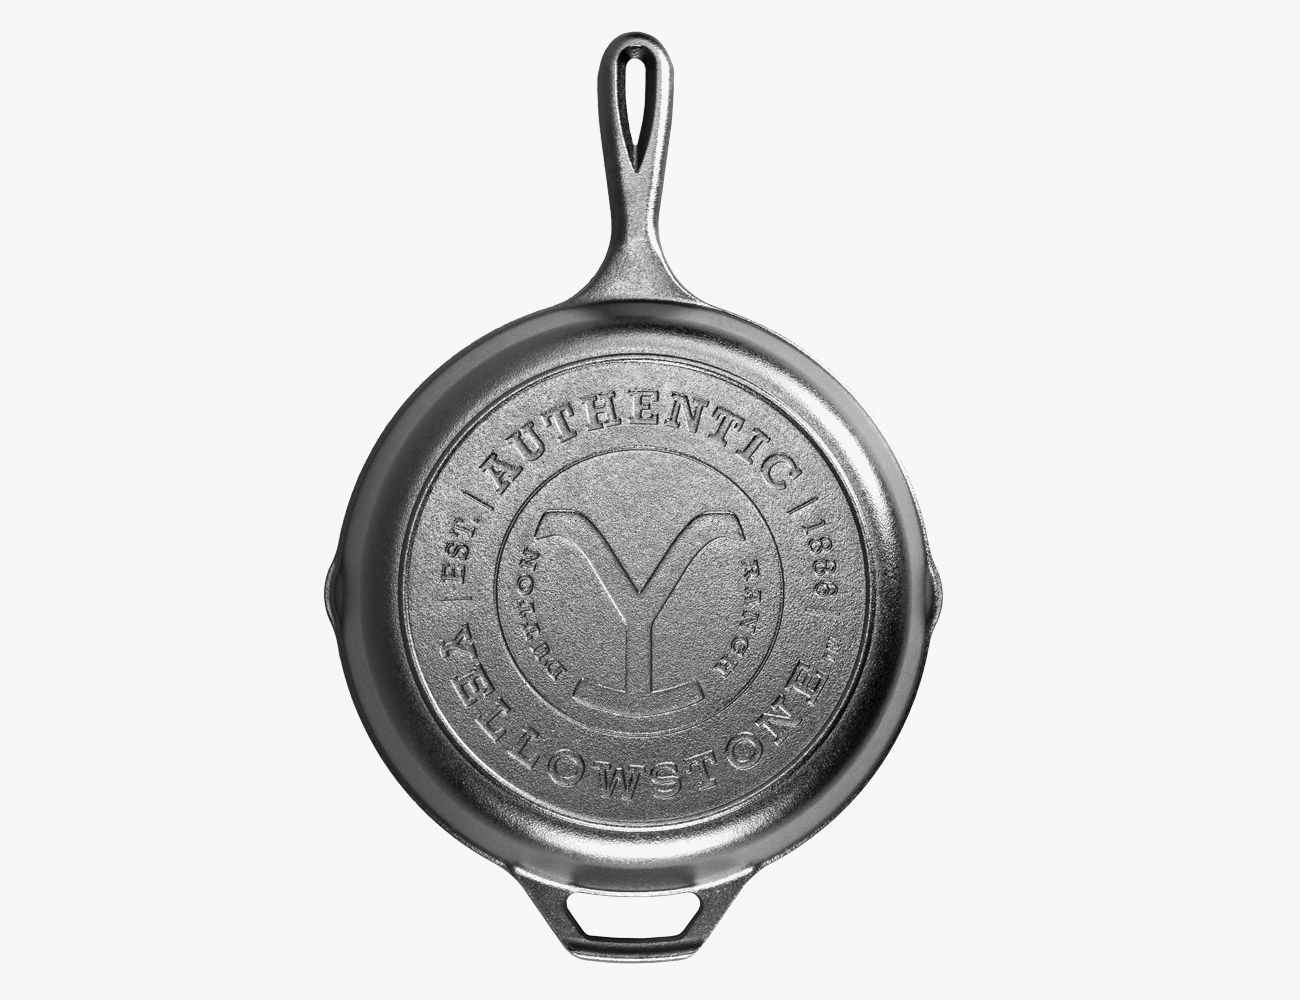 The Lodge Cast Iron Round Pan Is 42% Off at